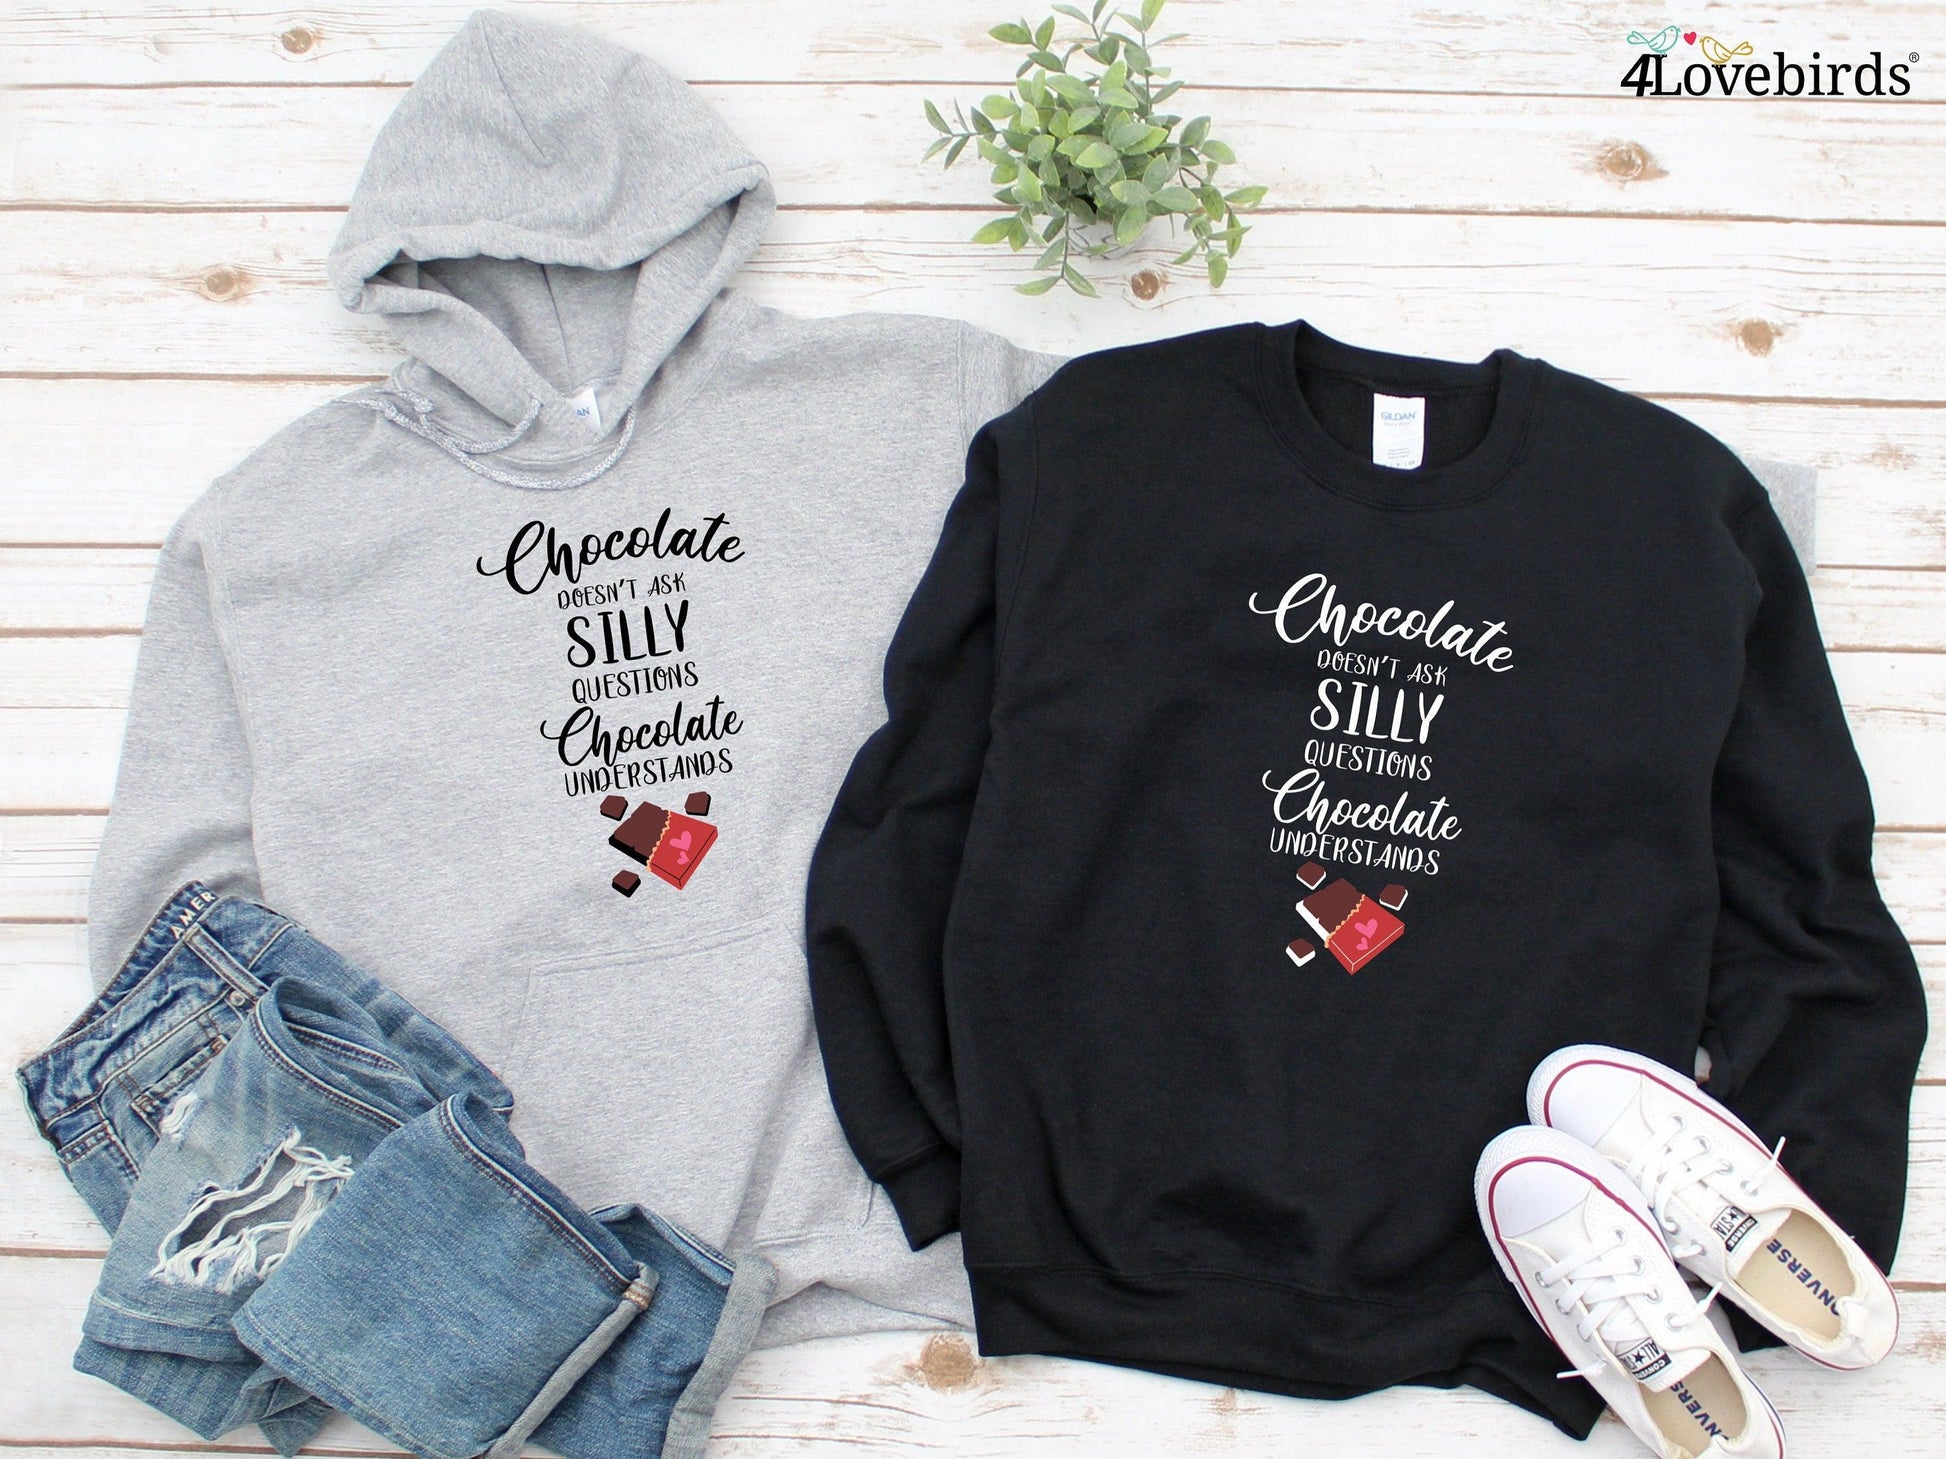 Chocolate doesn't ask silly questions Chocolate understands Hoodie, Funny T-shirt, Gift for Couples, Boyfriend and Girlfriend Longsleeve - 4Lovebirds